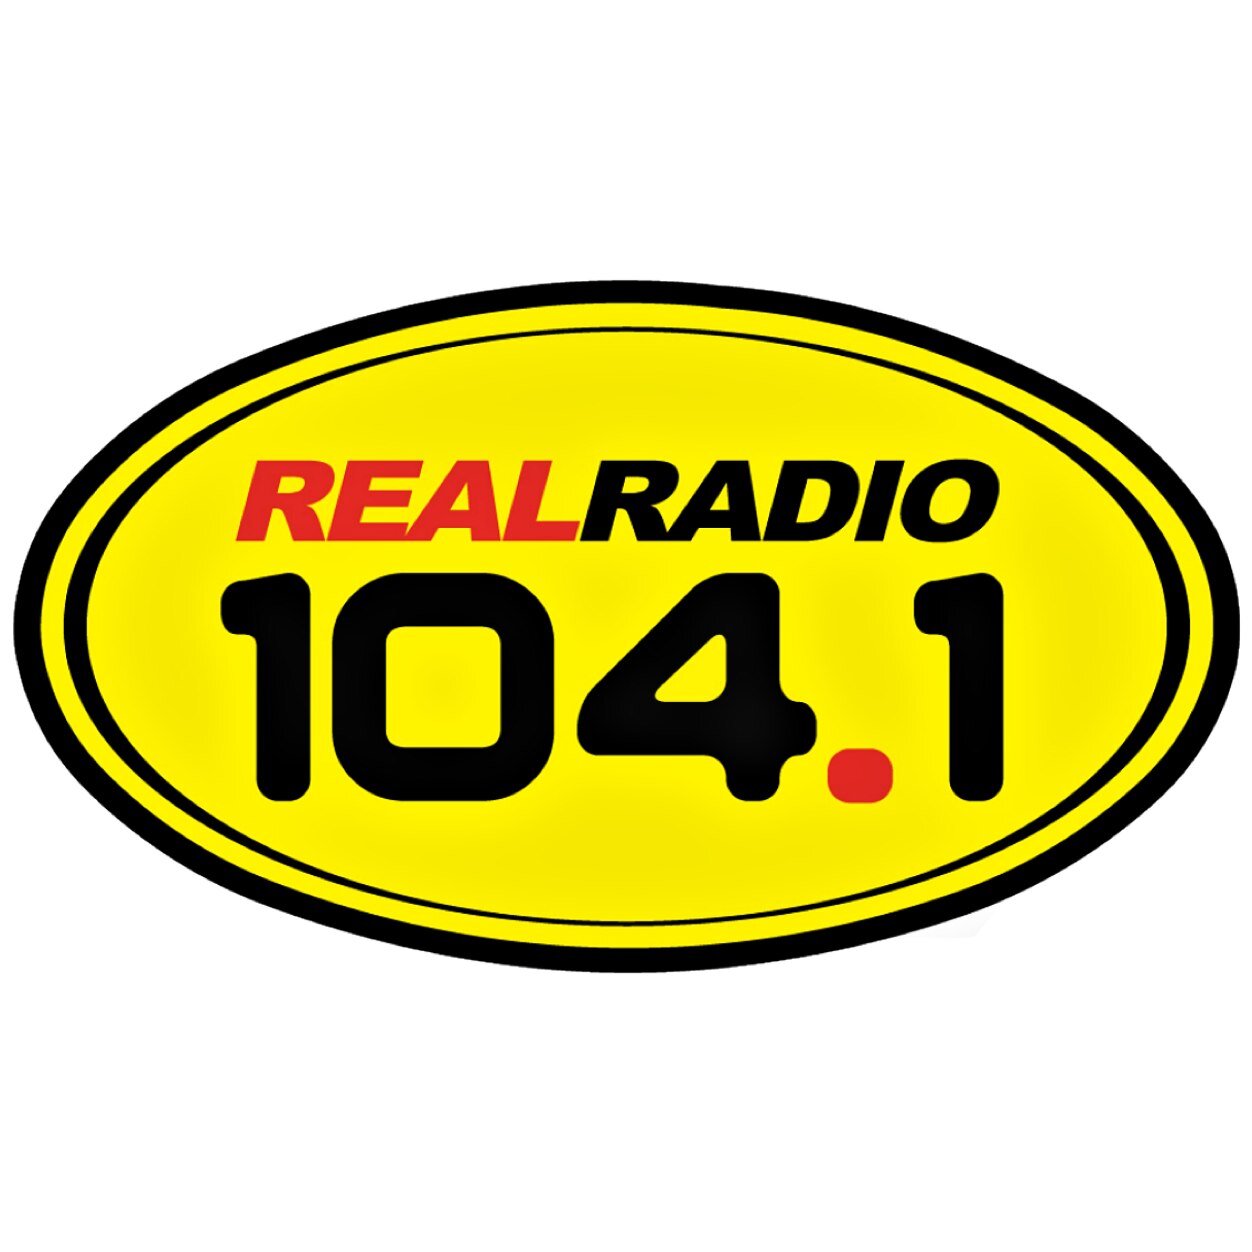 Join Moira & Real Radio 104.1 this Friday from 11am-1pm at Off Lease Only Orlando to enjoy free lunch and take advantage of your first chance to get your raffle ticket for the $20k Car Giveaway!